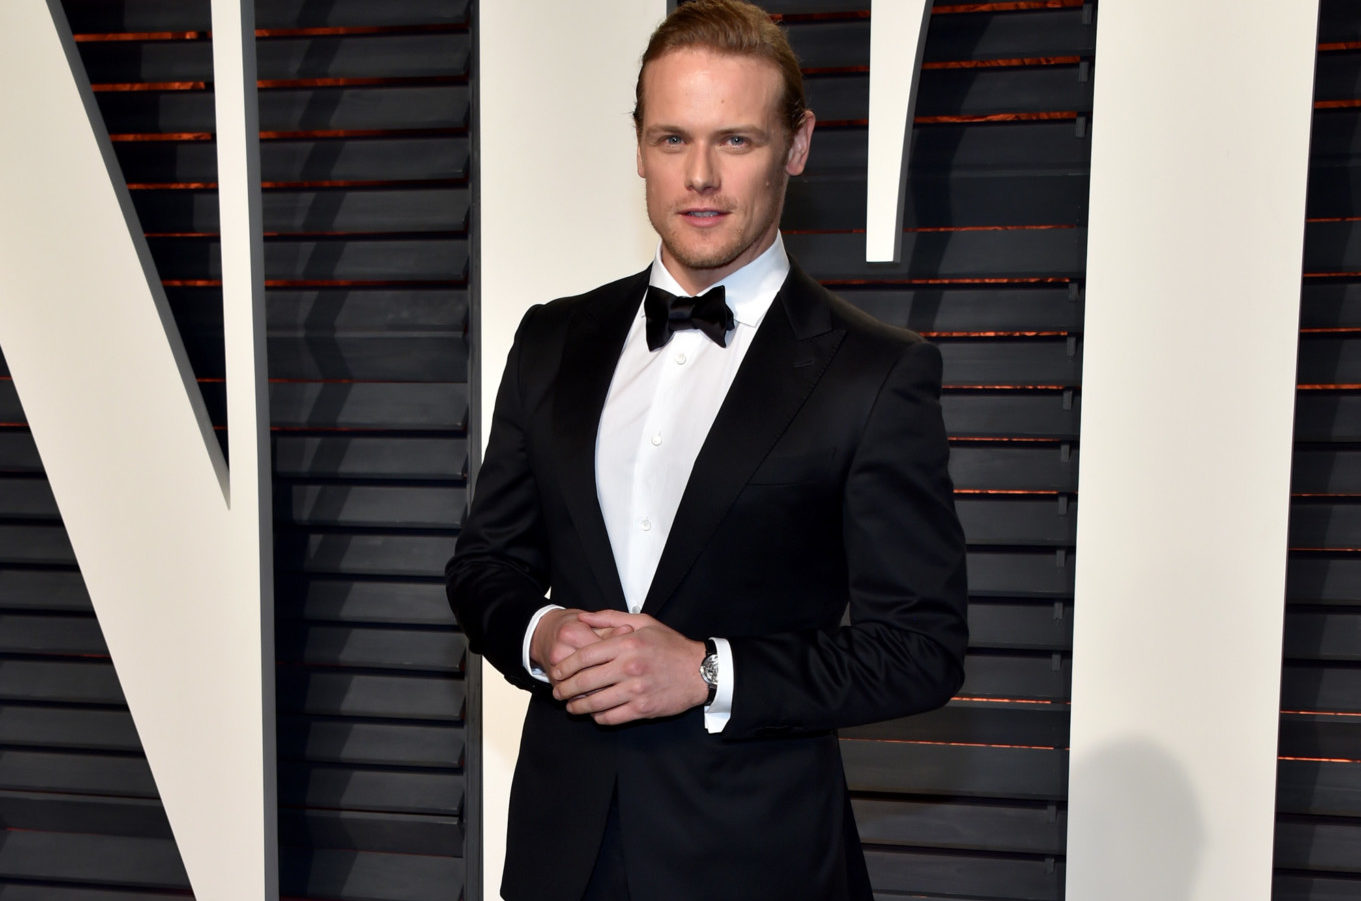 Beverly hills, ca - february 26: actor sam heughan attends the 2017 vanity fair oscar party hosted by graydon carter at wallis annenberg center for the performing arts on february 26, 2017 in beverly hills, california. (photo by pascal le segretain/getty images)